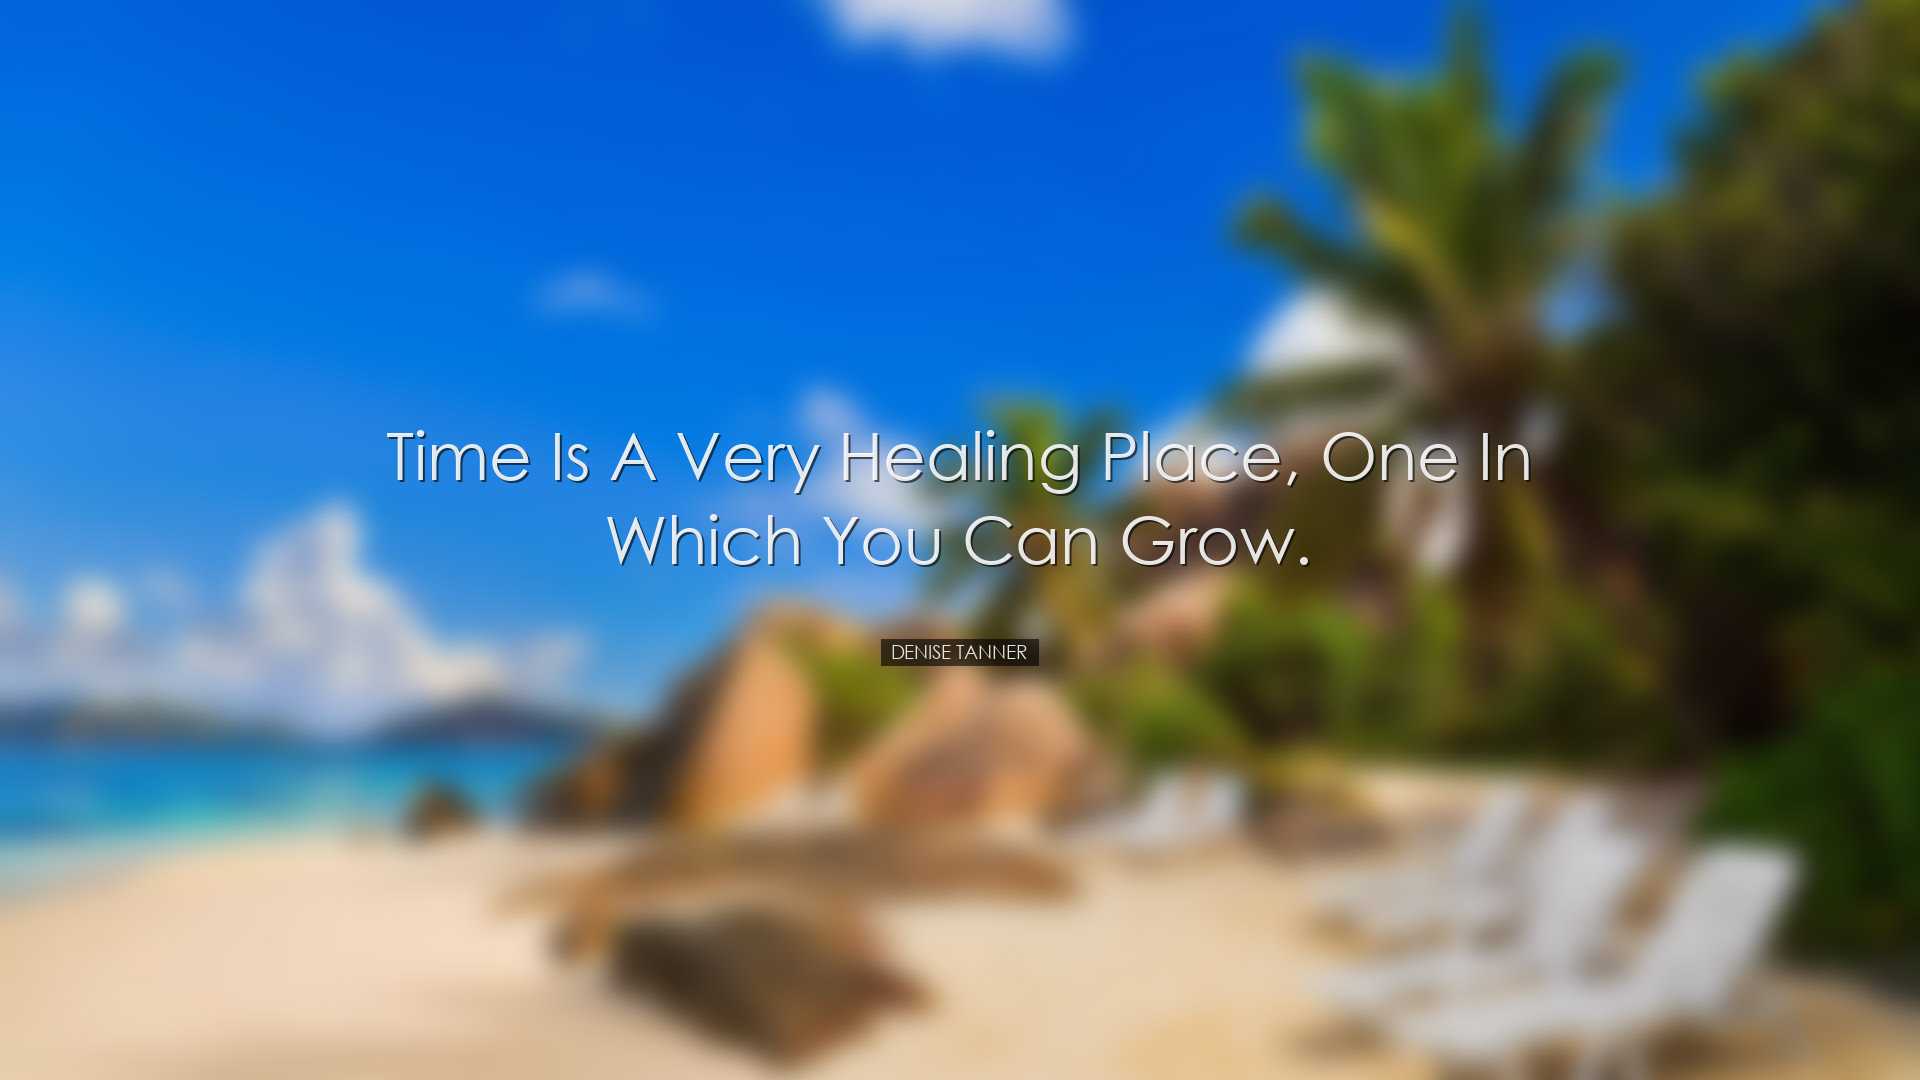 Time is a very healing place, one in which you can grow. - Denise